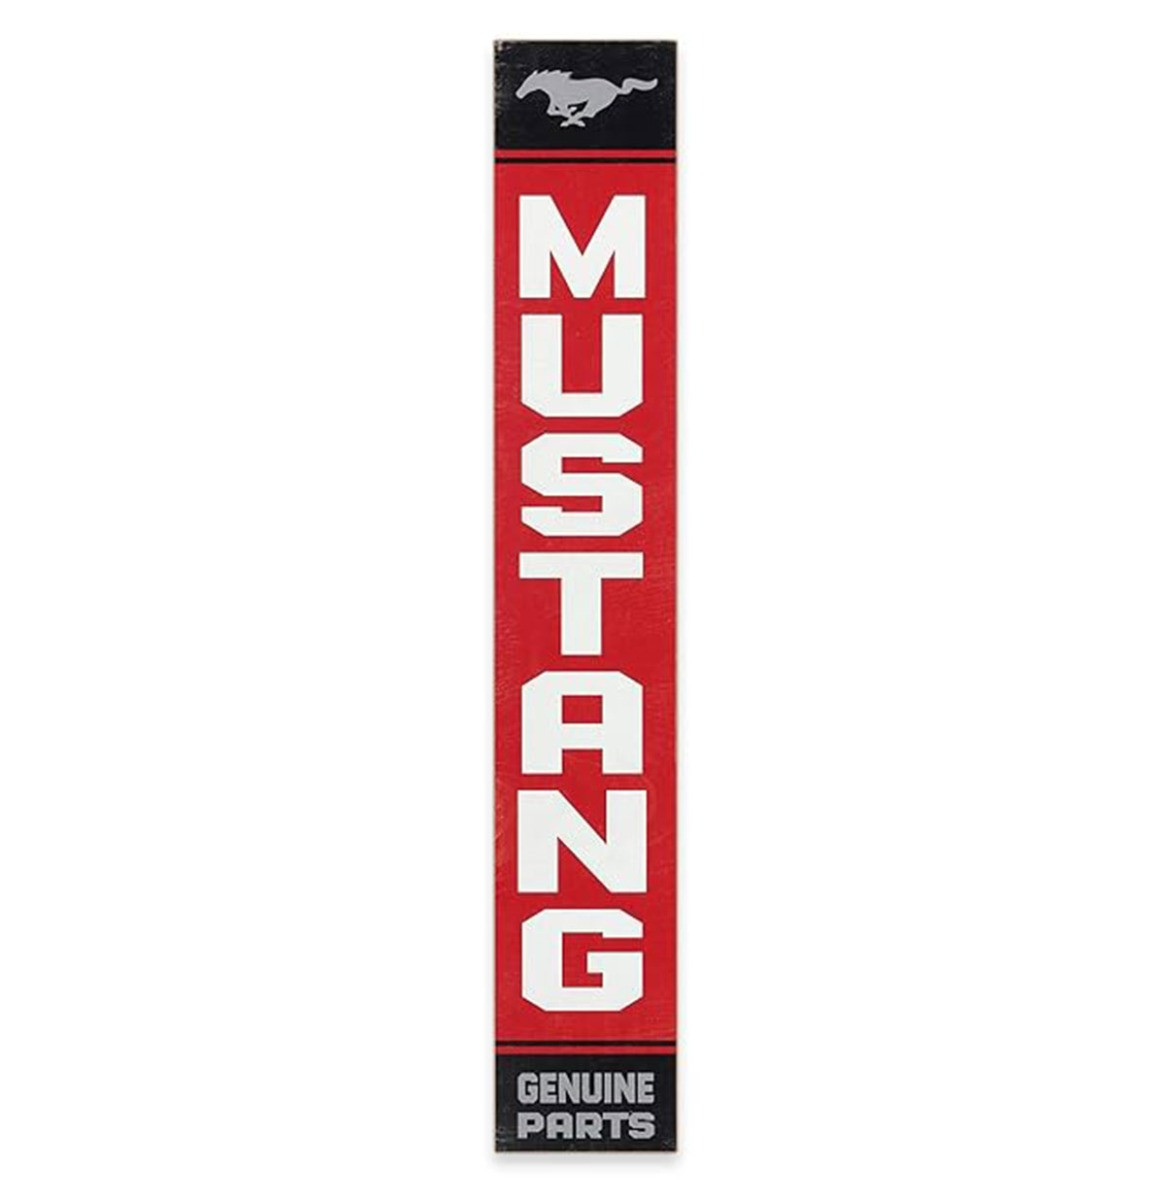 Ford Mustang Genuine Parts Houten Bord - 72 x 12cm